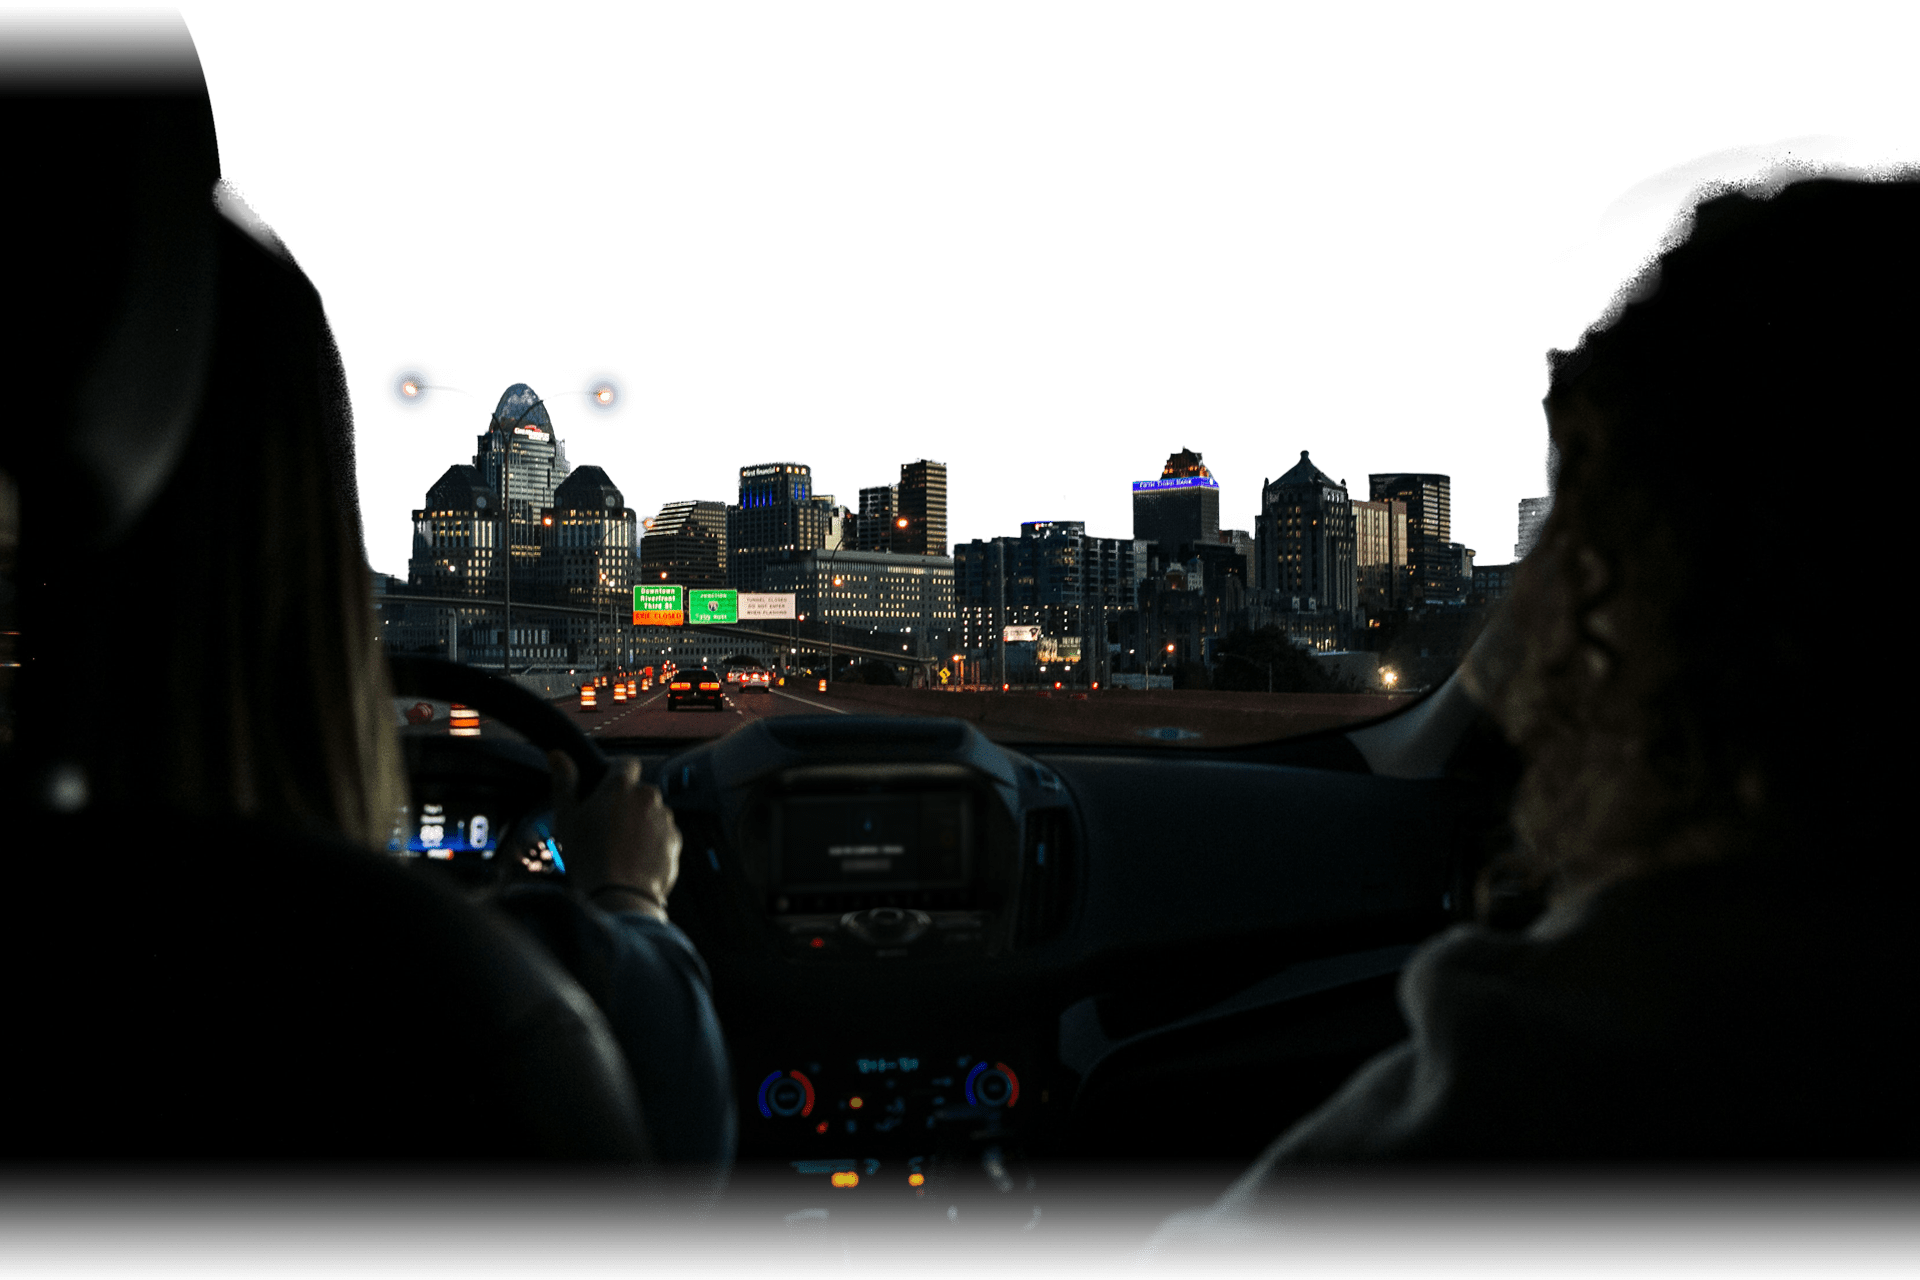 a view of driving into a city center from within a vehicle at night